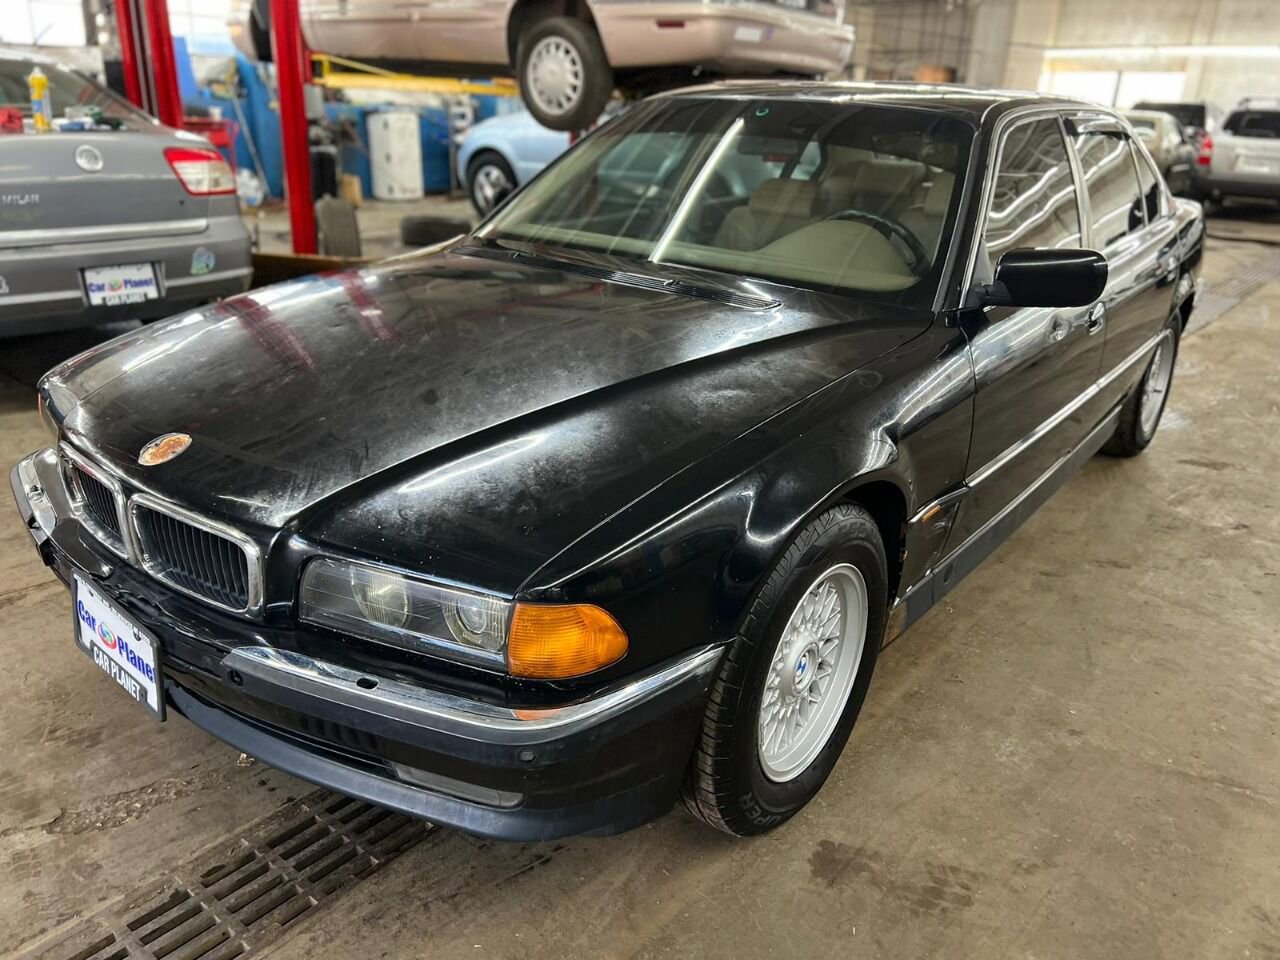 Used 1997 BMW 7 Series Cars for Sale Right Now - Autotrader